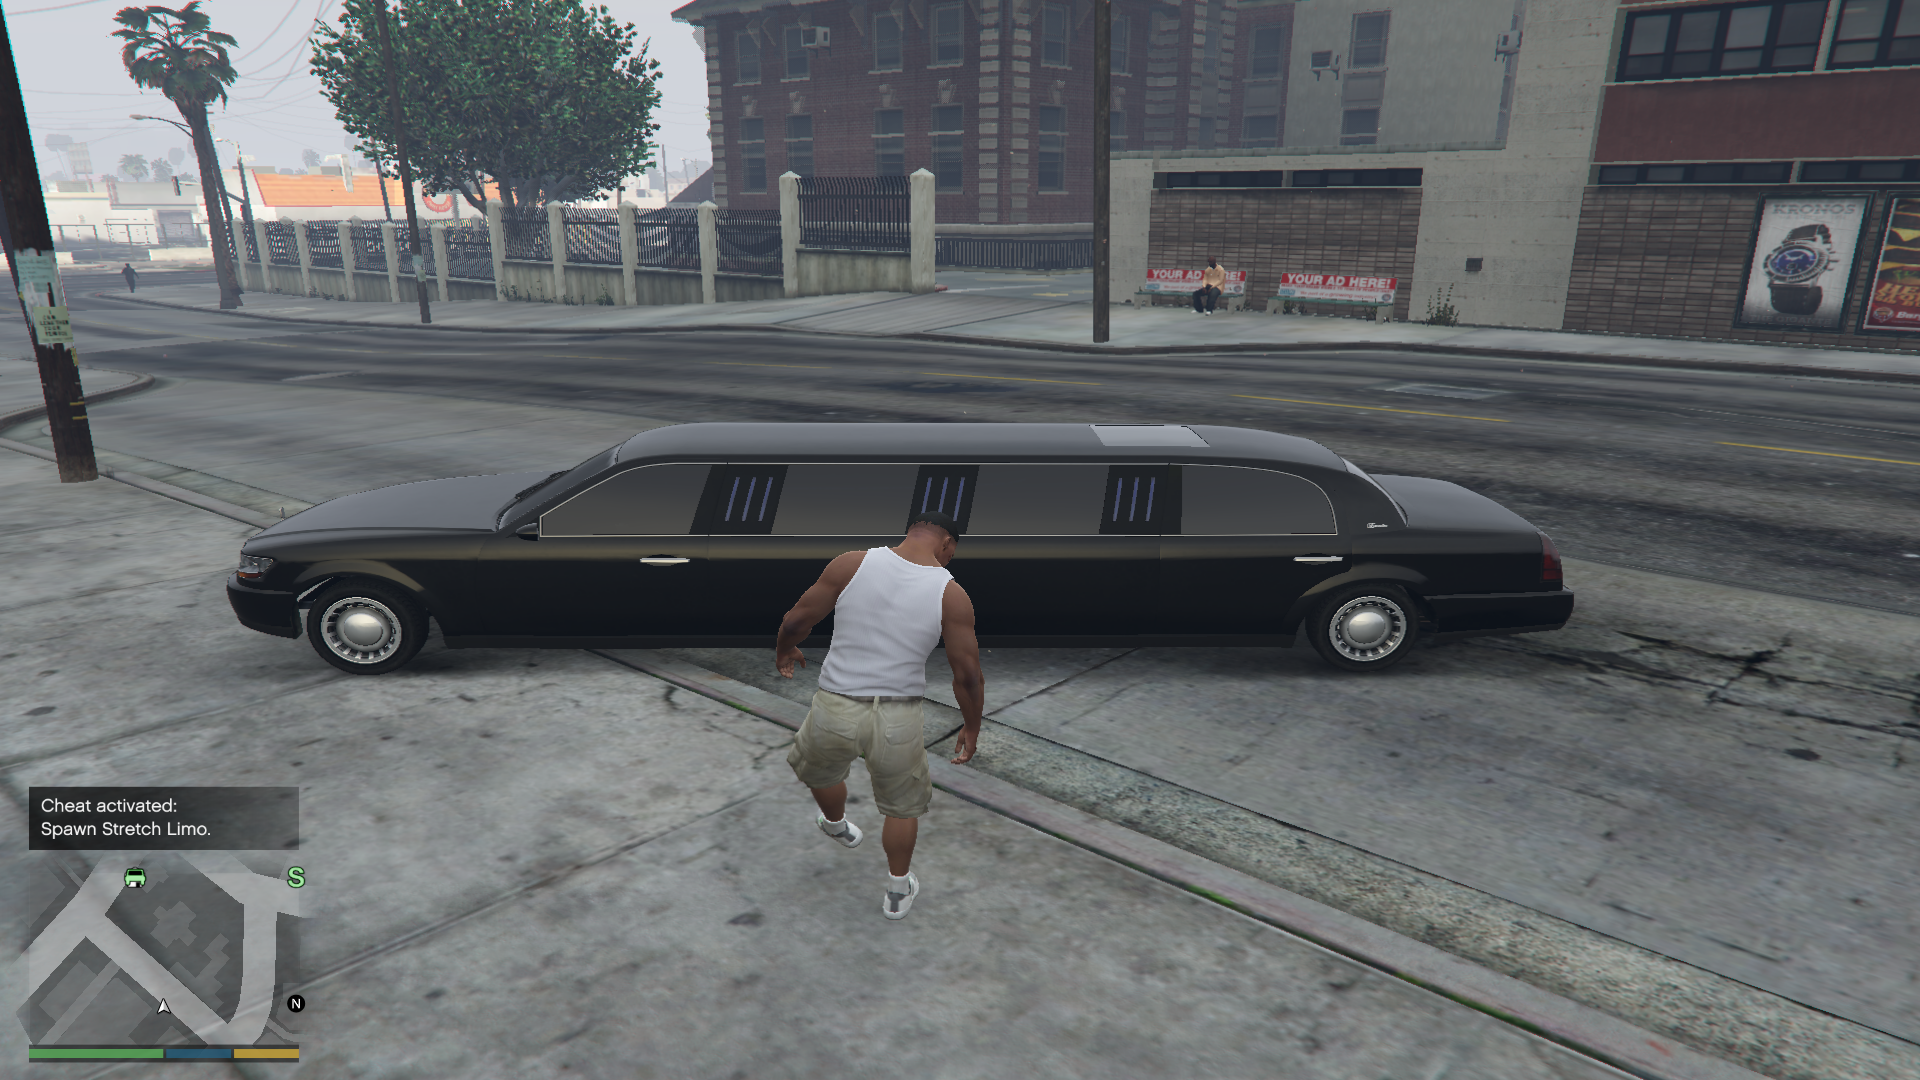 A screenshot from Grand Theft Auto 5, showing the character Franklin in front of a limousine.